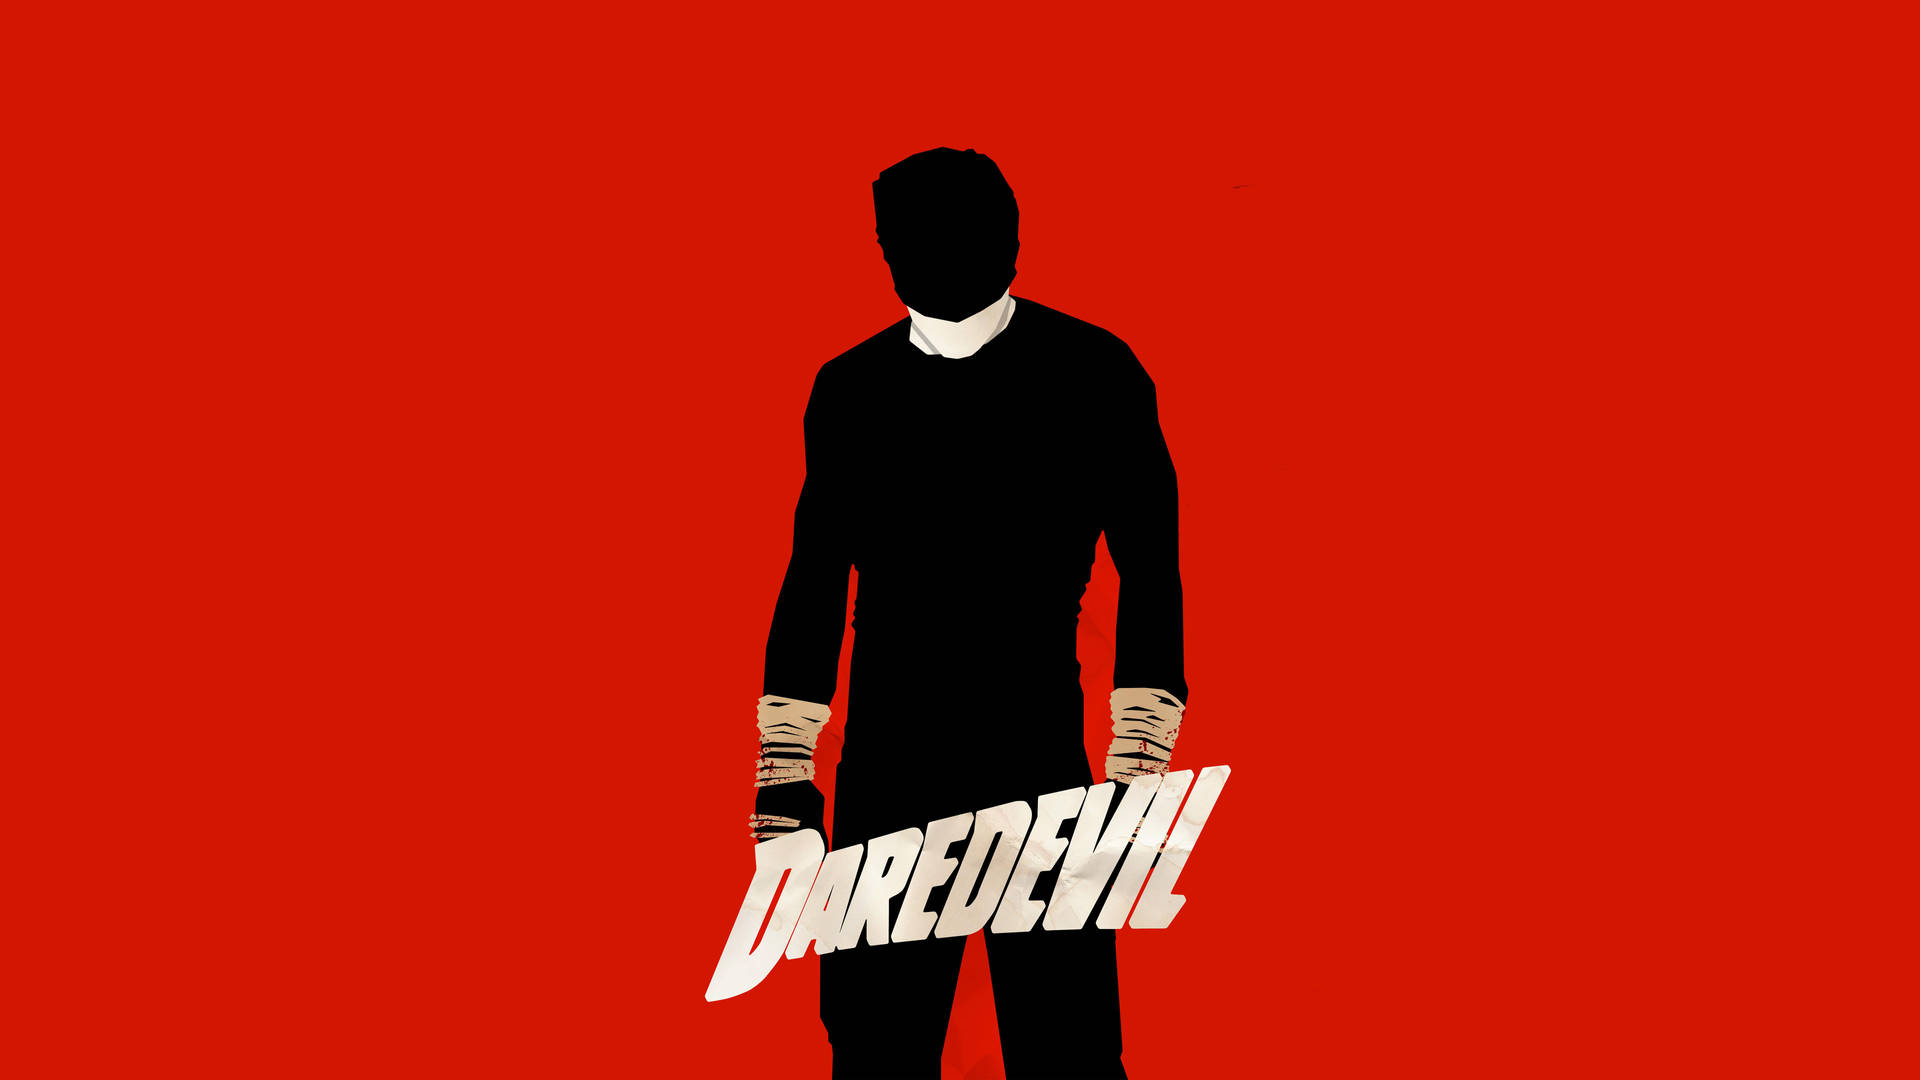 Simple Daredevil Abstract Logo